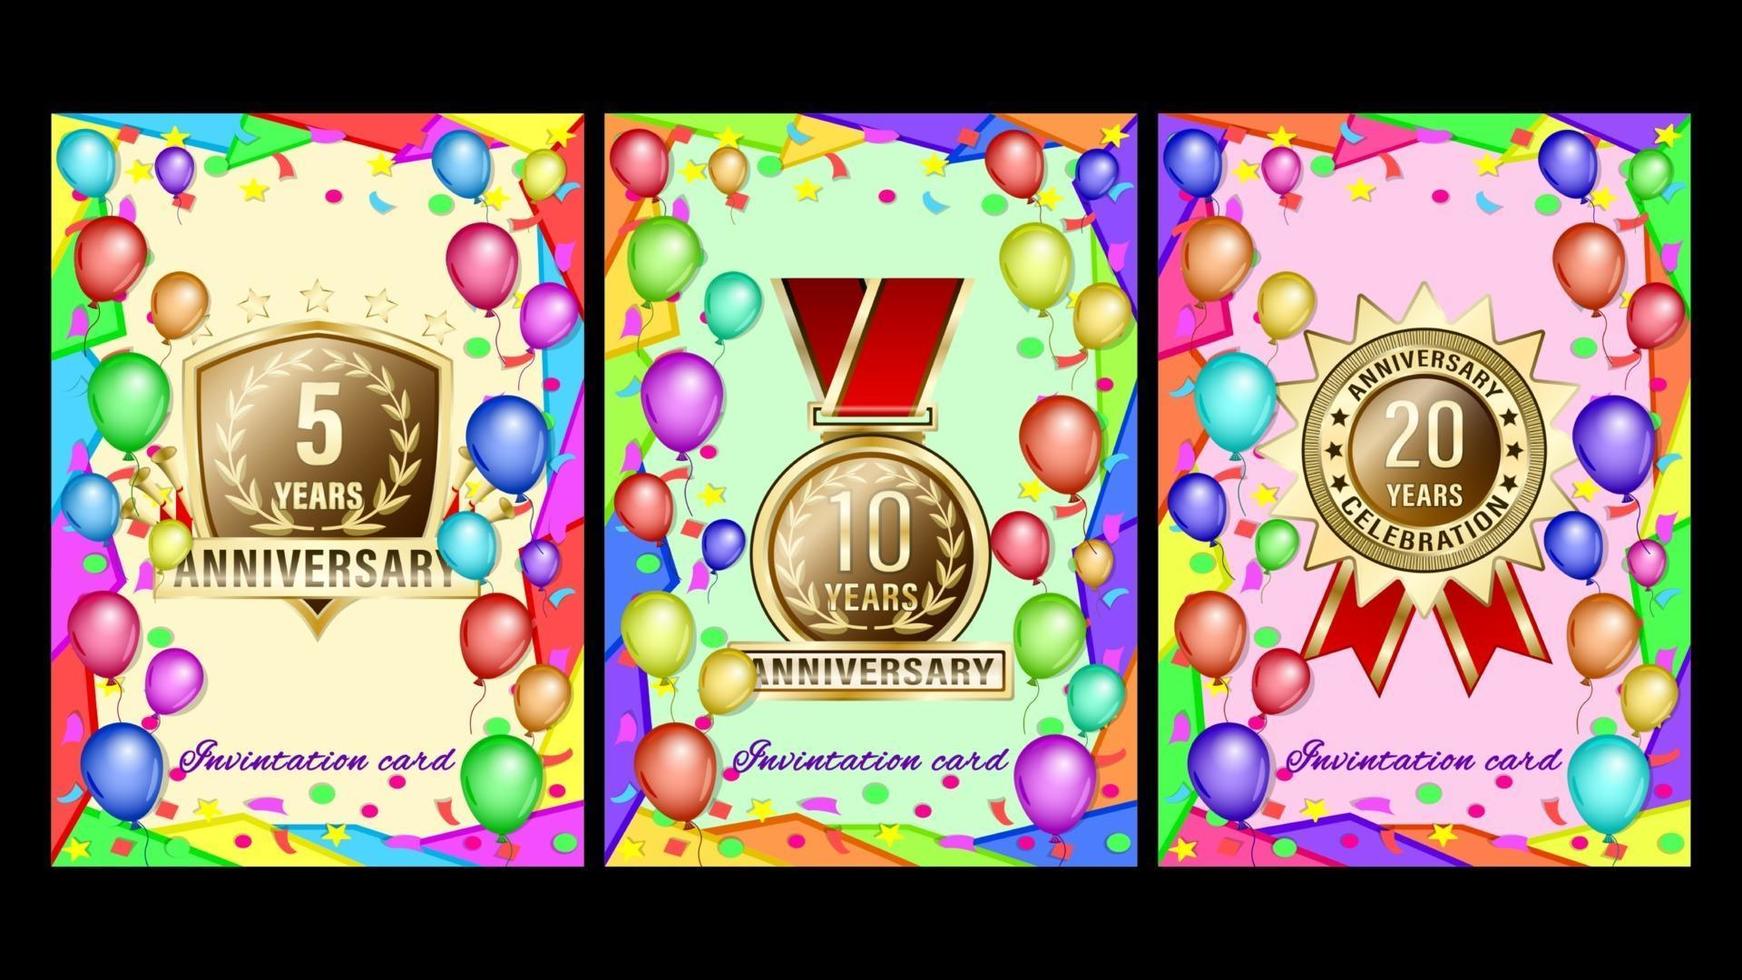 Colorful Invintation card Anniversary Holiday vector